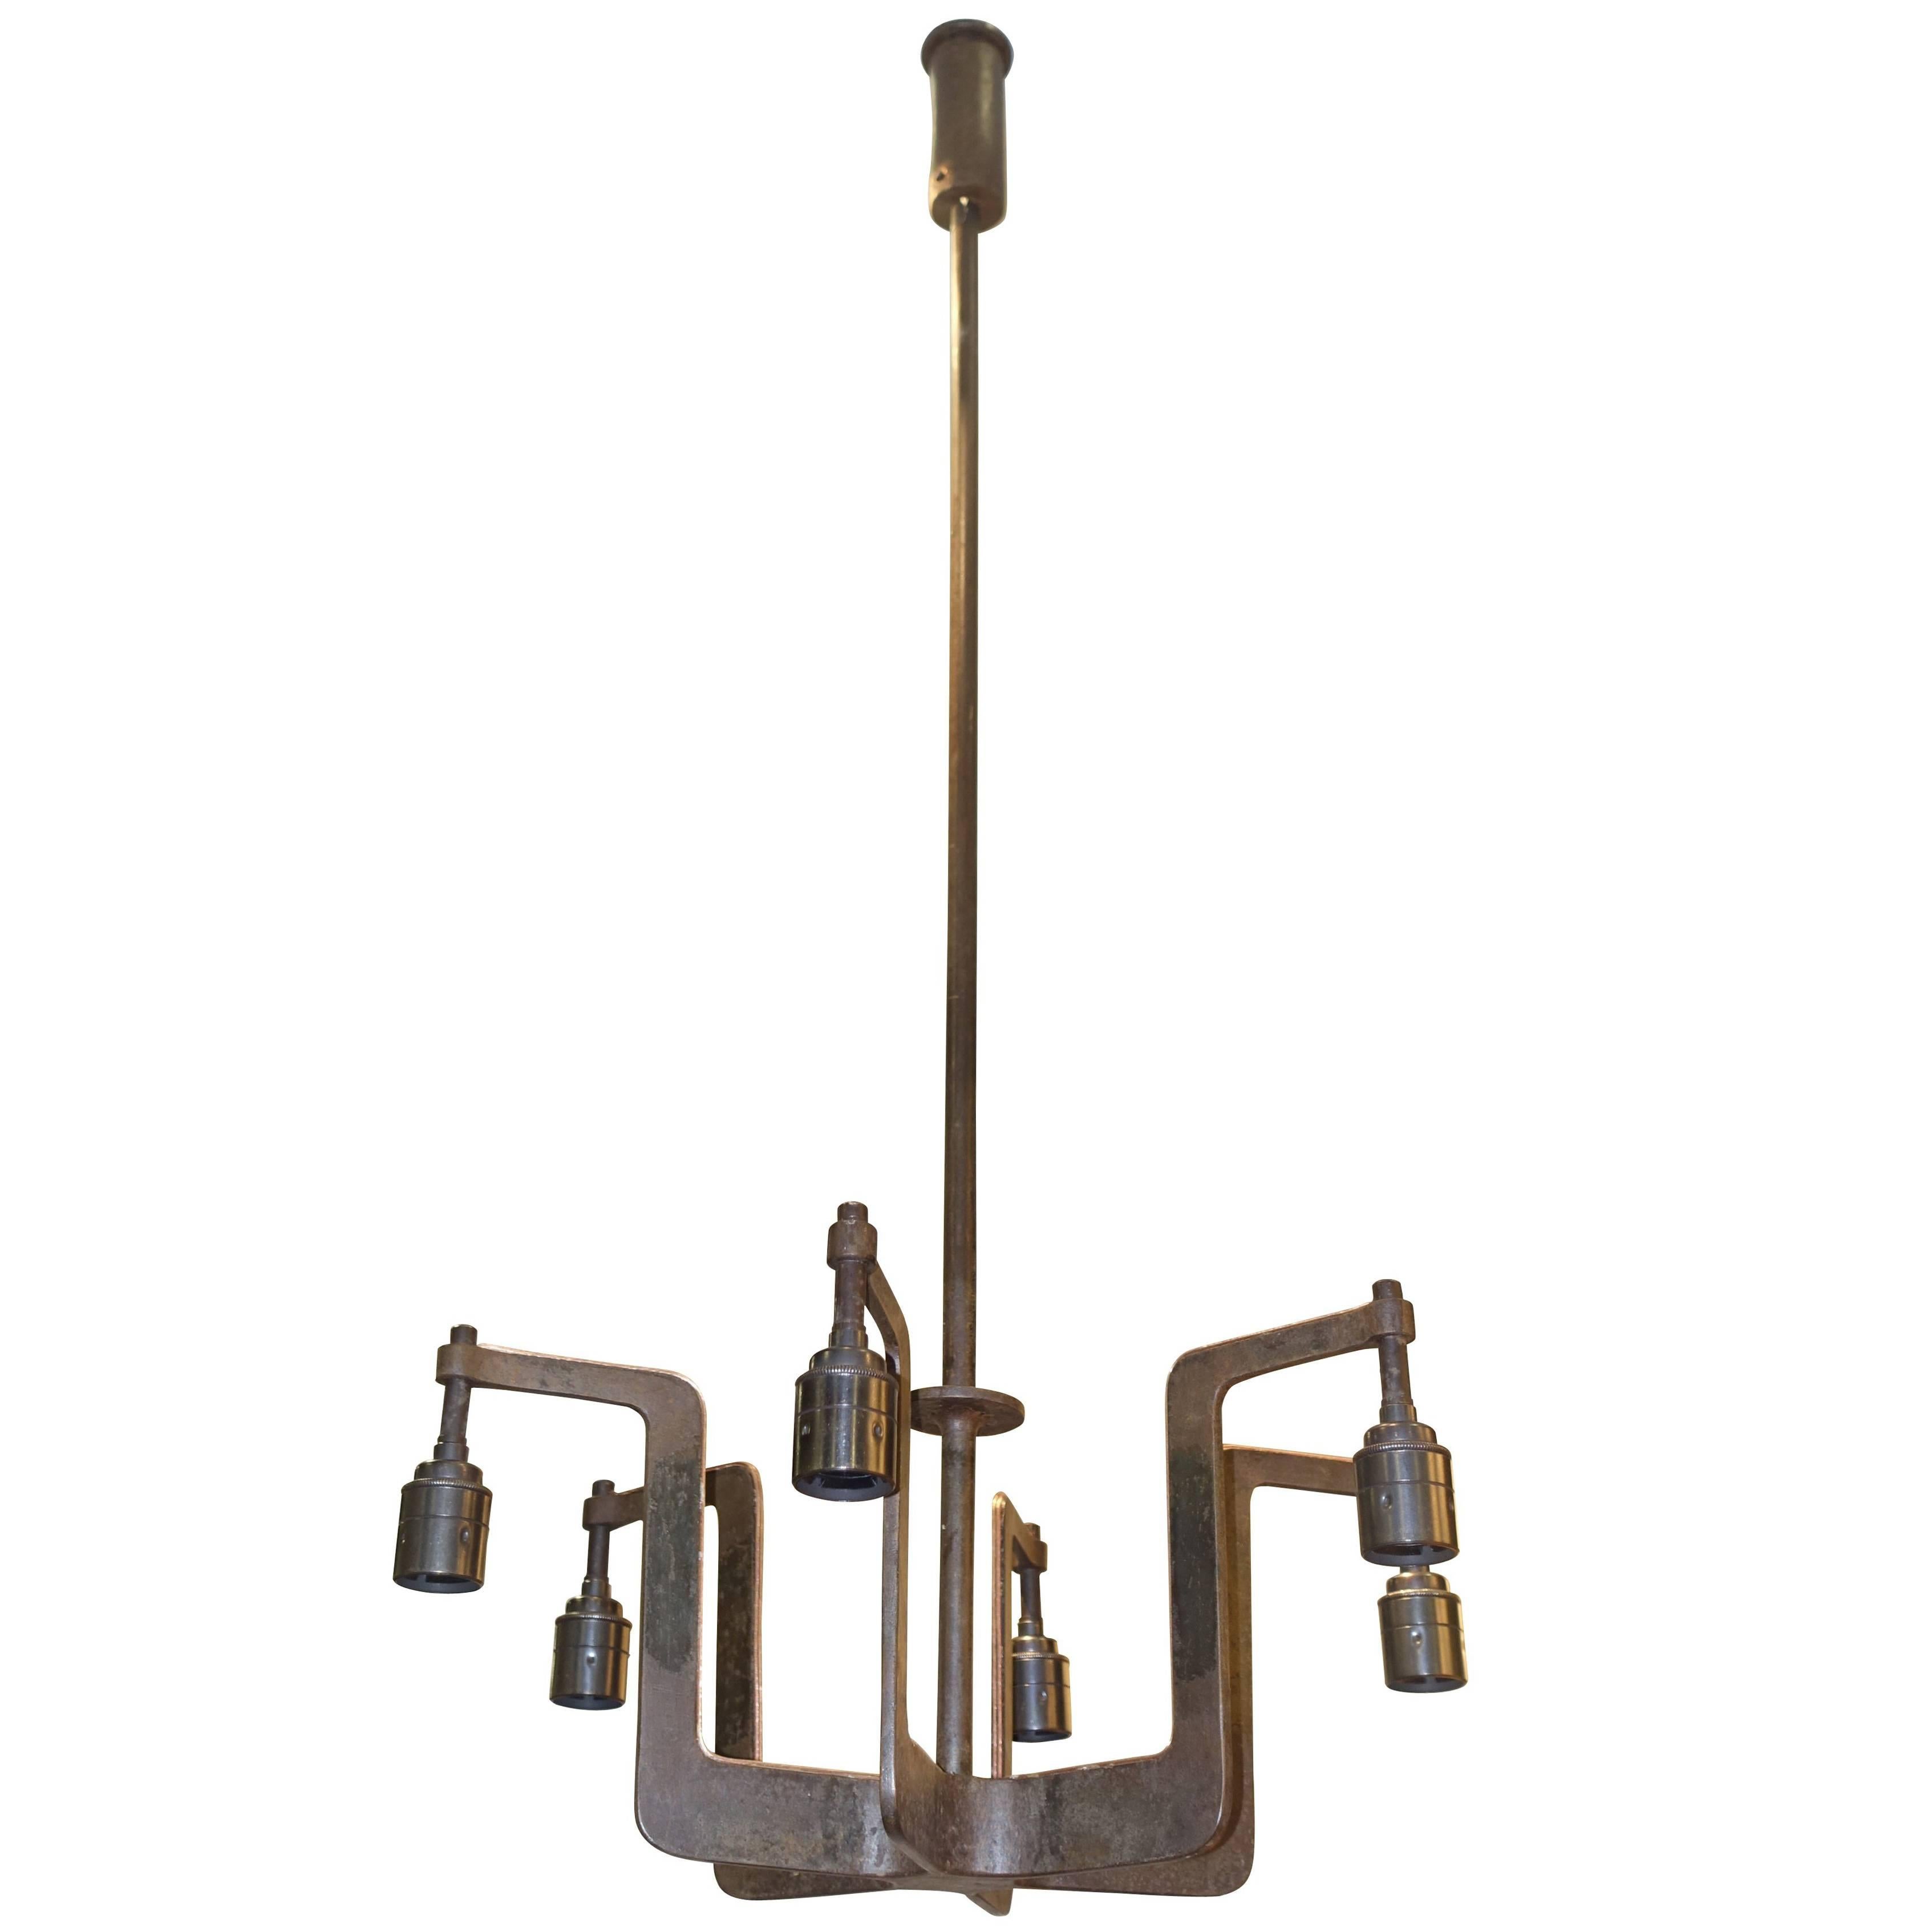 1940s French charming six arm black steel chandelier.
Supporting rod and cap also of black steel.
Nice naturally aged patina.
Measures: Overall height 42.5